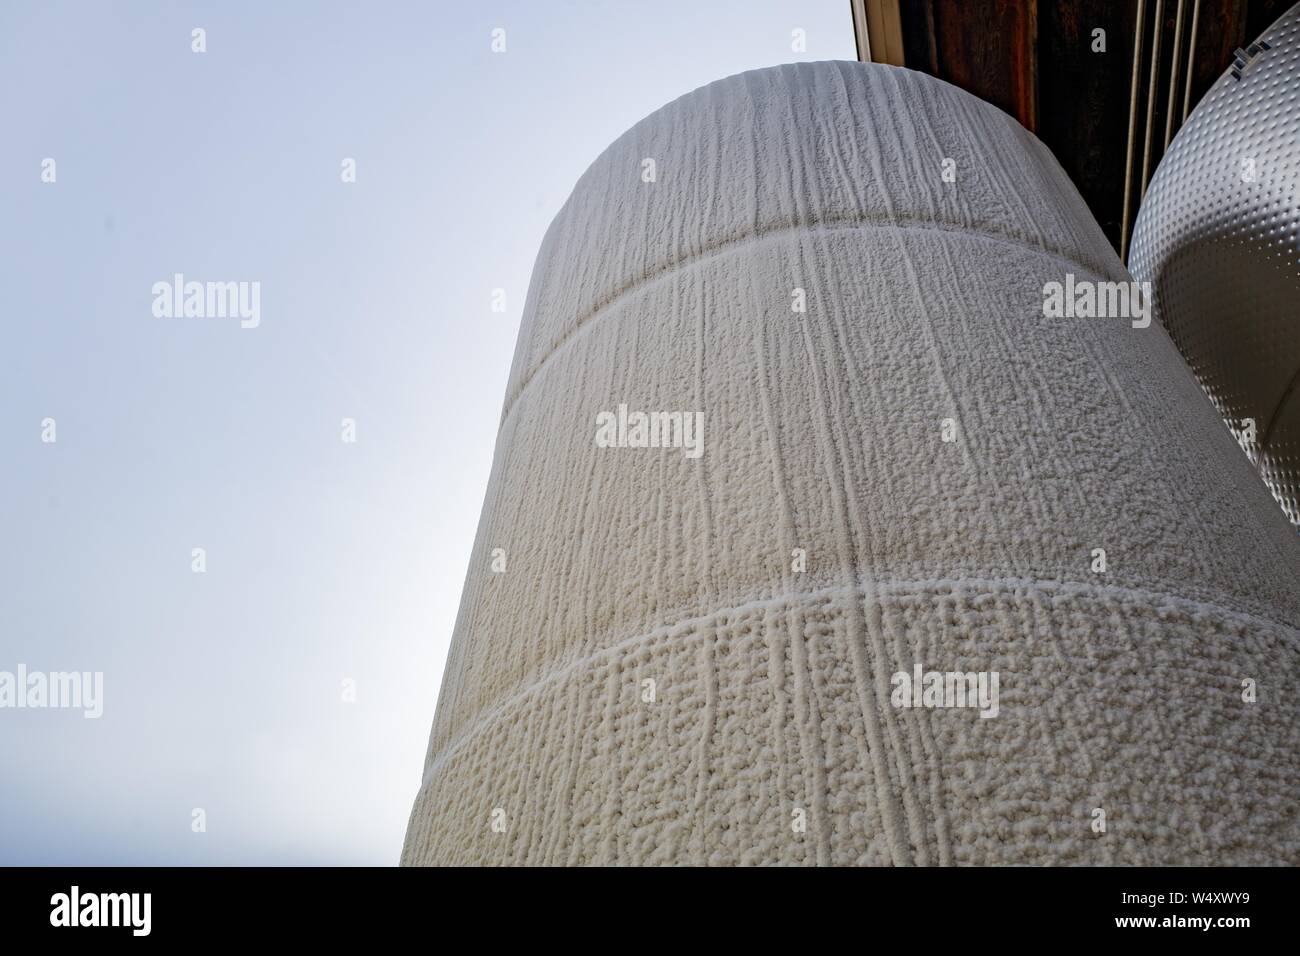 Low-angle view of large stainless steel tank covered in frost at a wine production facility in Sonoma County, Healdsburg, California; the tank is chilled below freezing and filled with wine in order to stop fermentation and hold the finished wine until it is able to be bottled, December 22, 2018. () Stock Photo